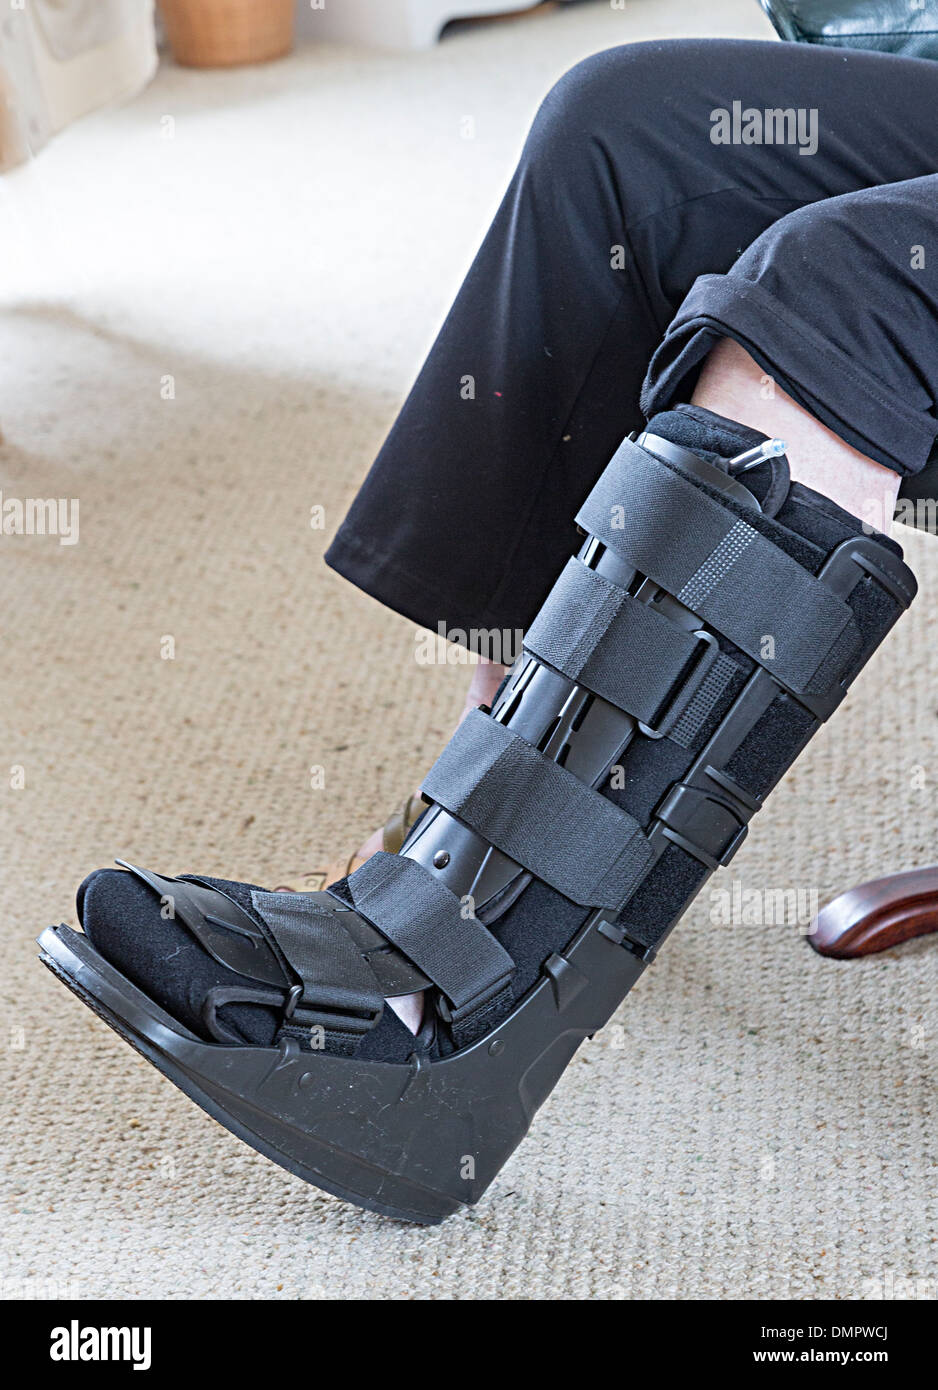 Modern reusable cast for broken ankle as used in UK hospitals Stock Photo